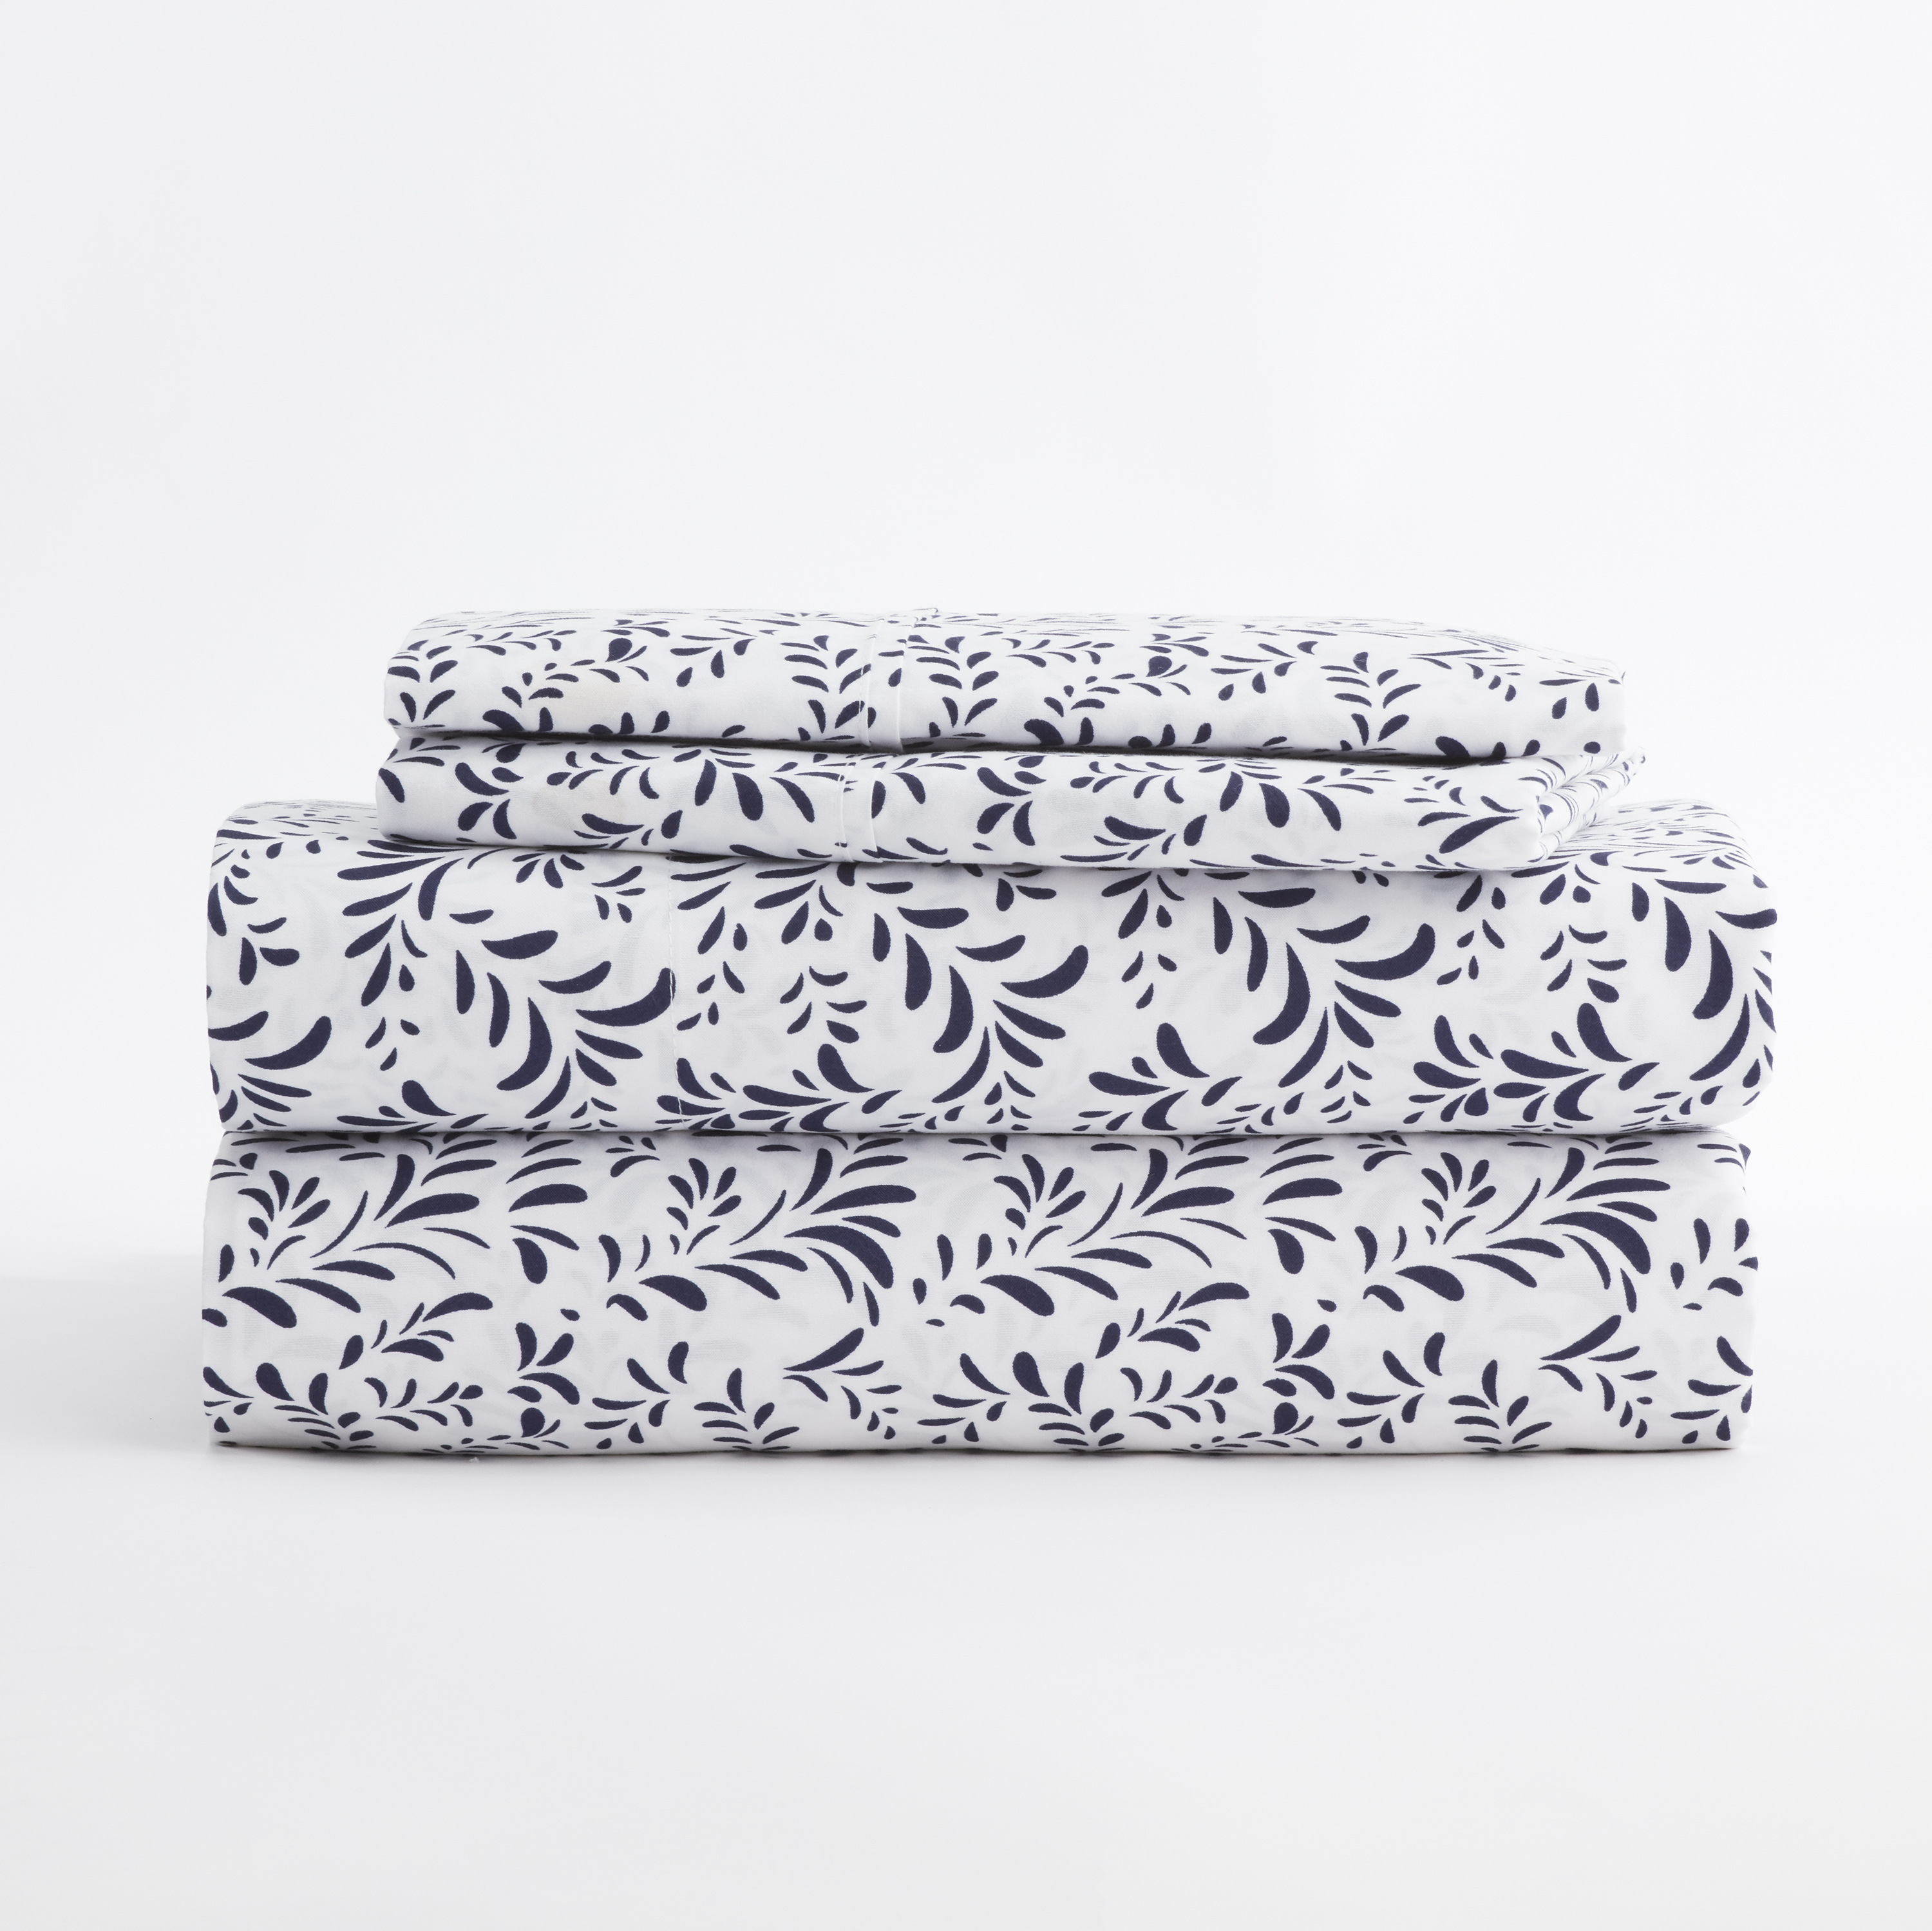 Burst of Vines Patterned Sheet Set from $20.25 + Free Shipping